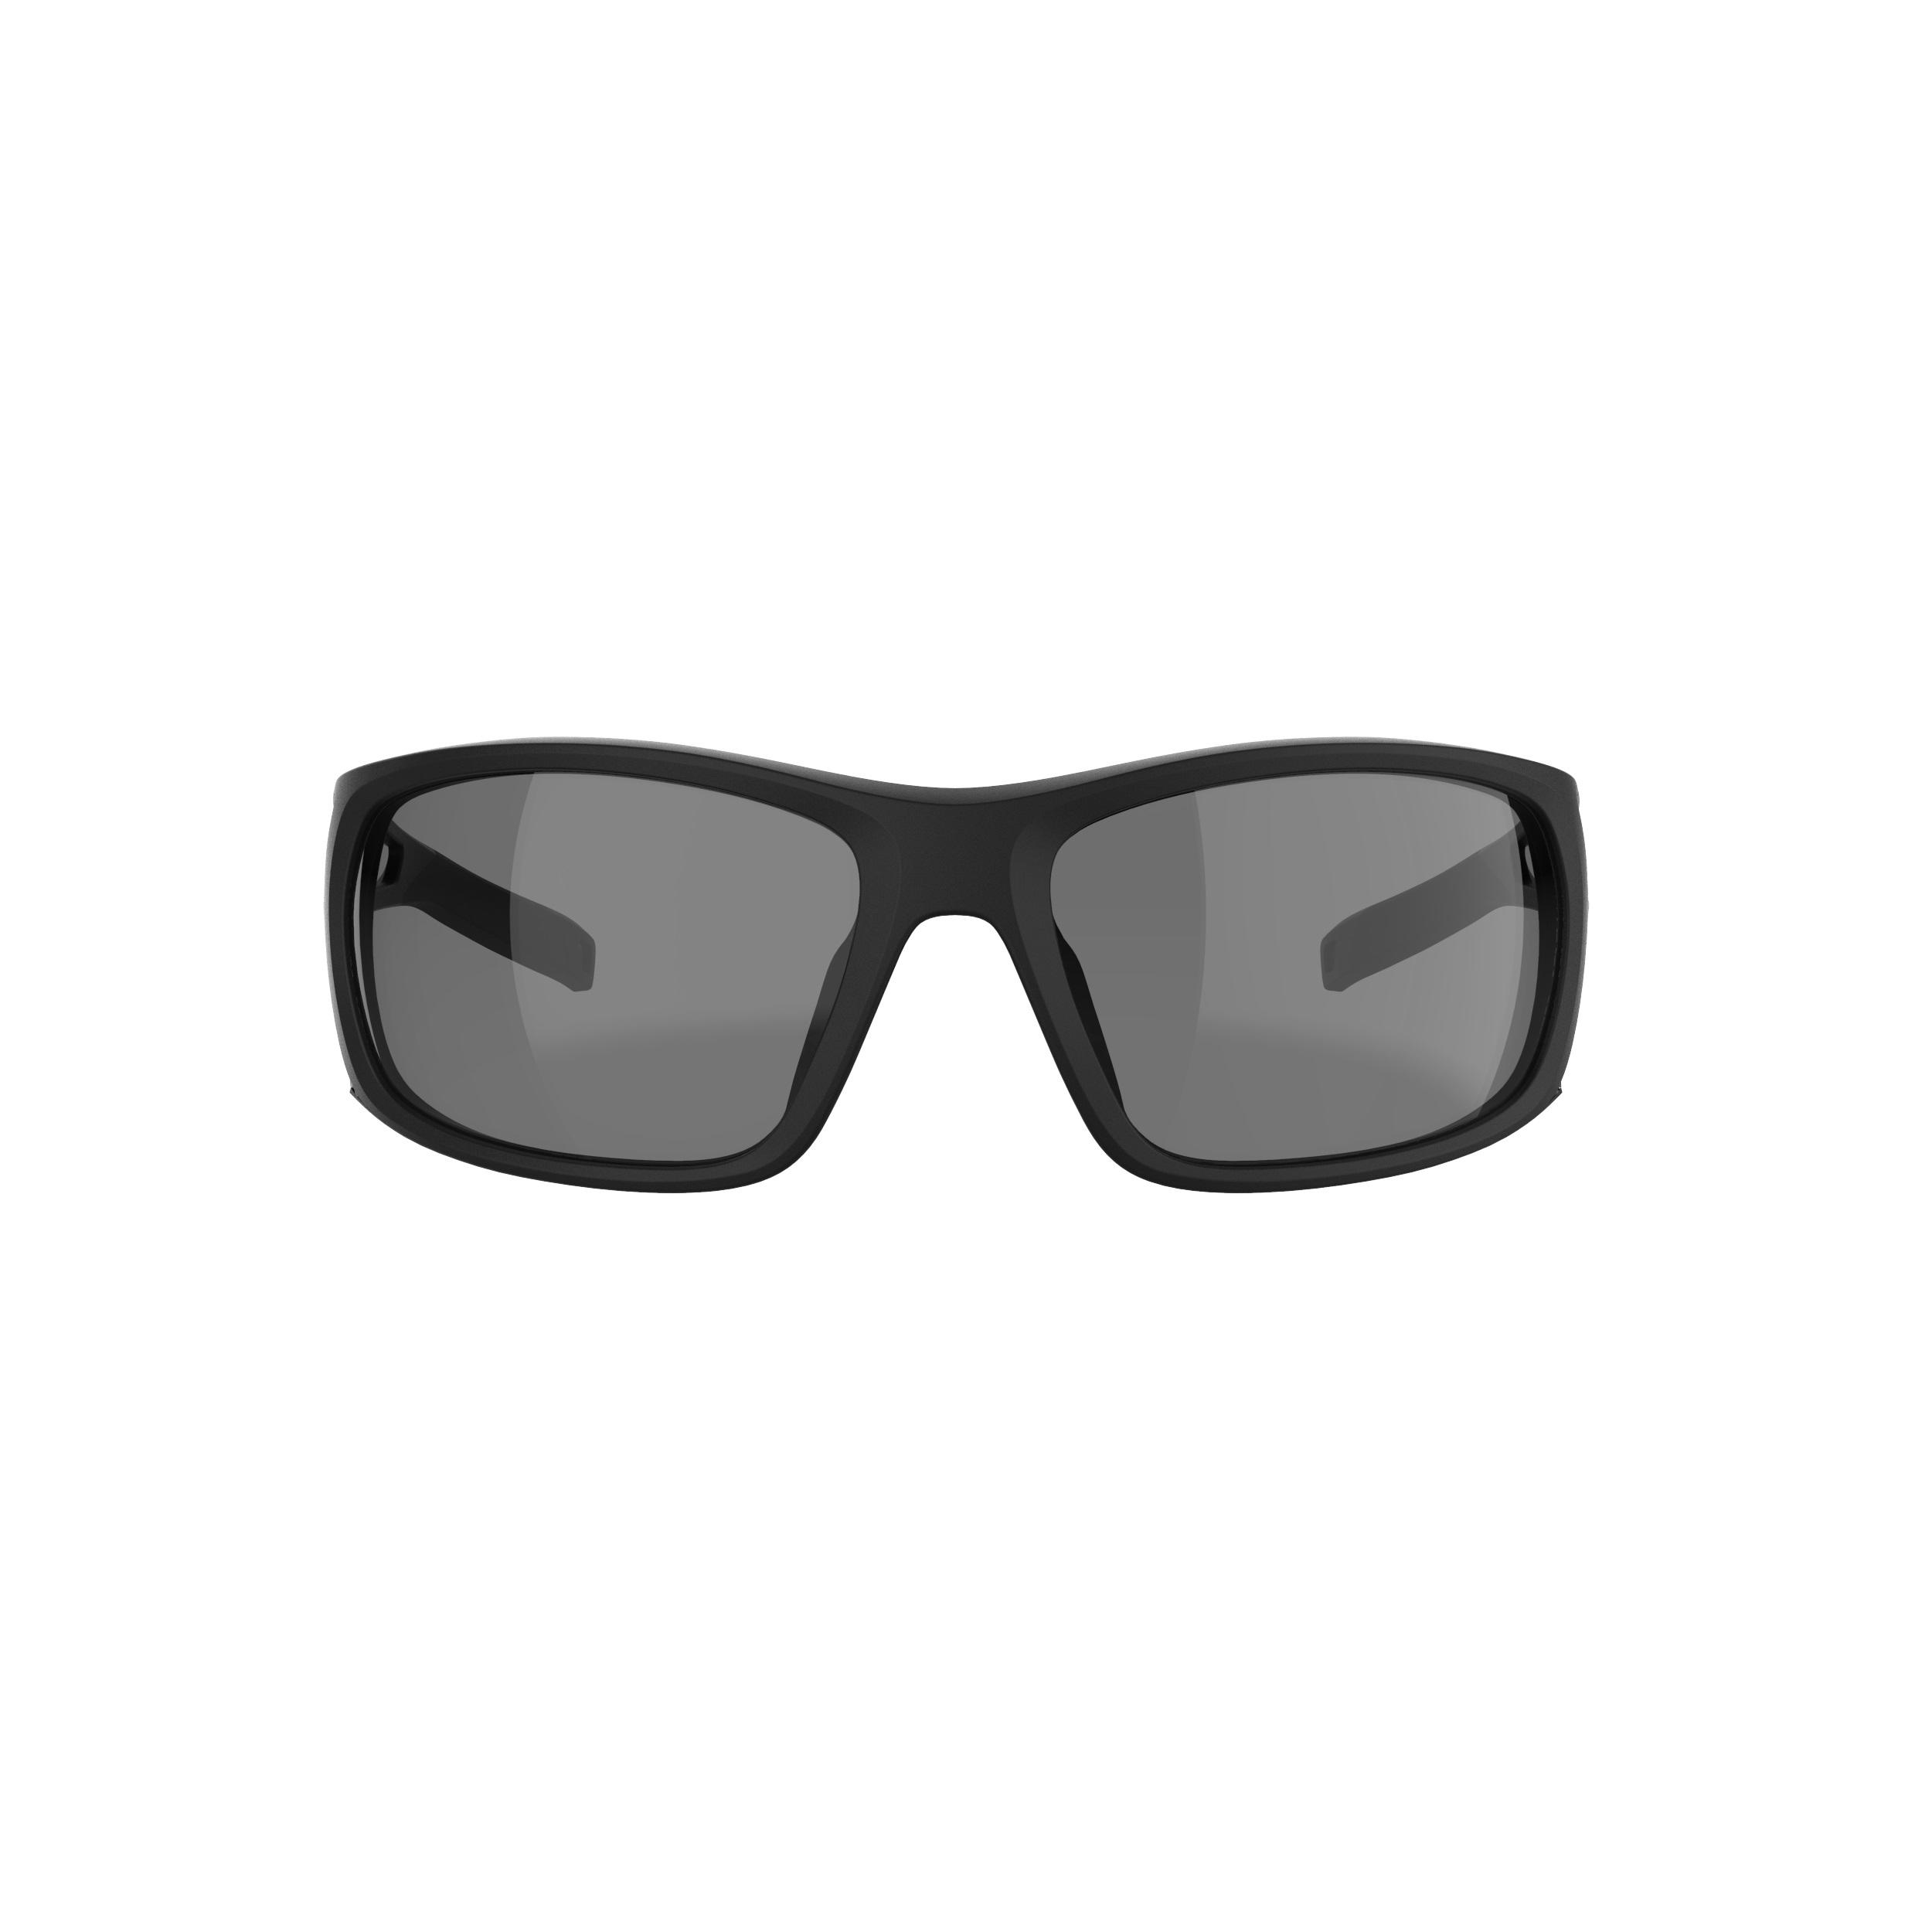 ADULT HIKING SUNGLASSES FOR YOUR EYESIGHT - MH580 - POLARISED CATEGORY 3 3/4